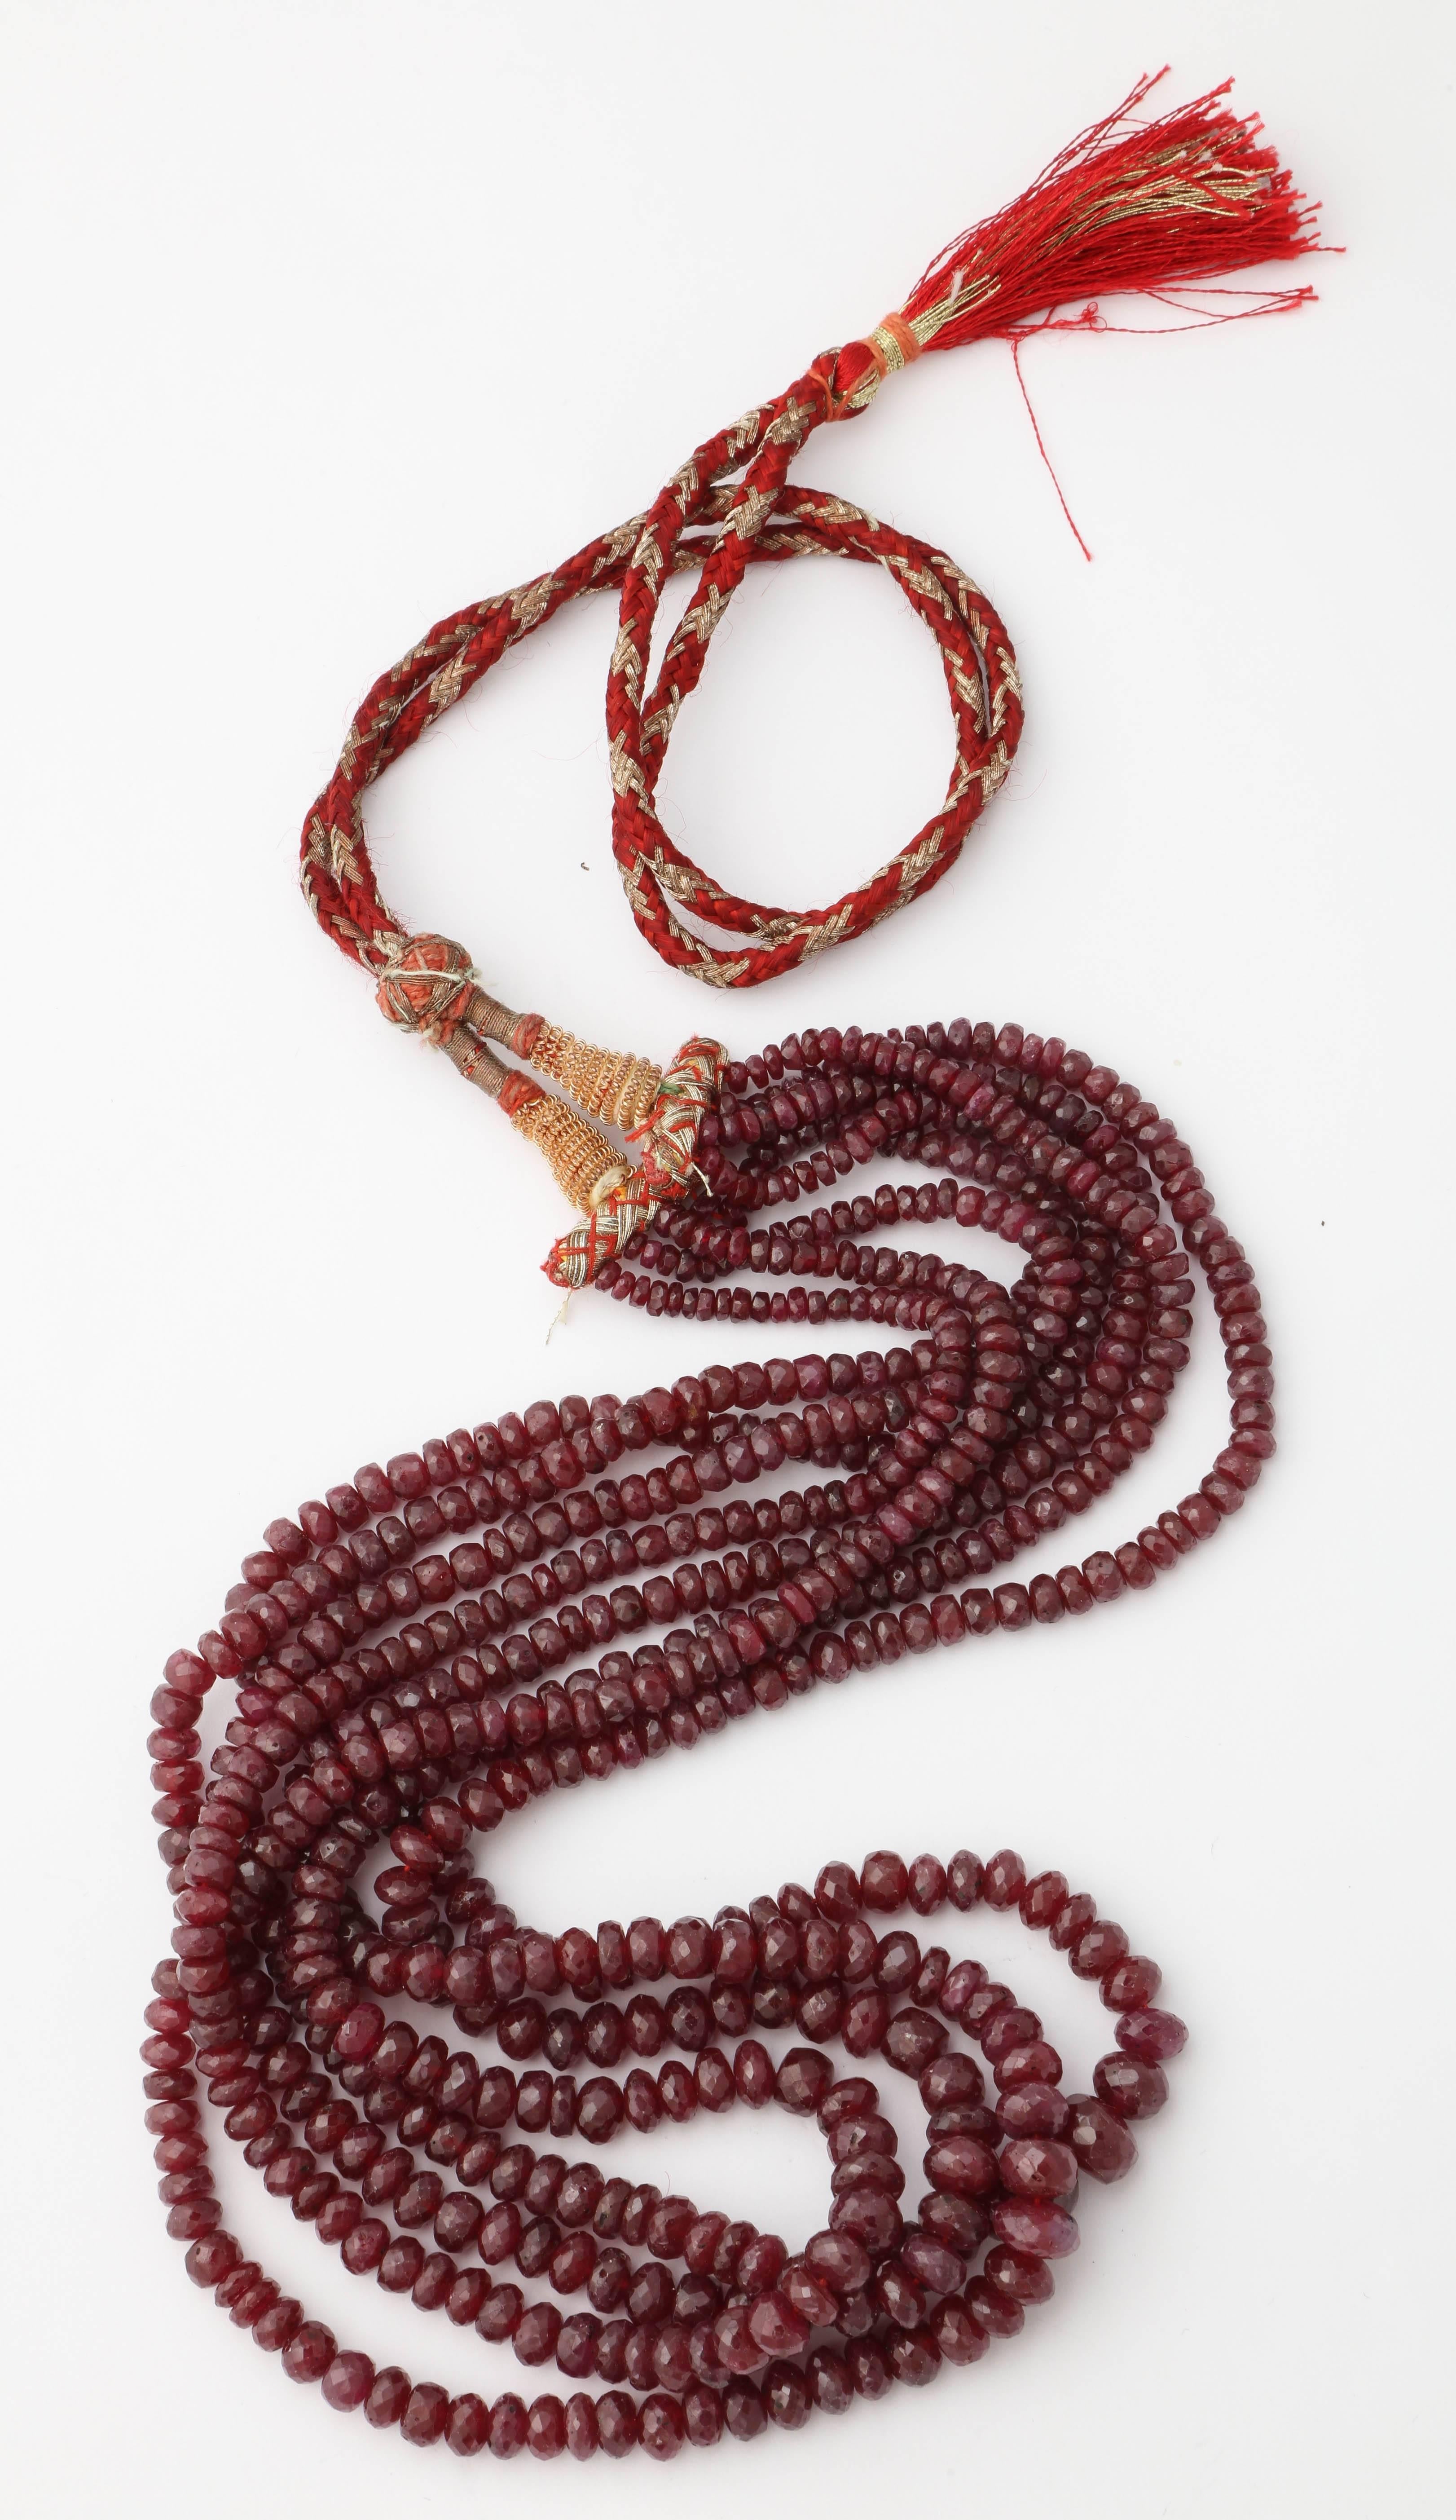 Graduated 4 Strand Faceted Ruby Necklace with original Stringing. Can be modernized - but oh how lovely to cross over & be a modern Auntie Mame without having to wear a sari and wrap yourself in 9 yards of resplendent silk Fabric.  Go for it!
